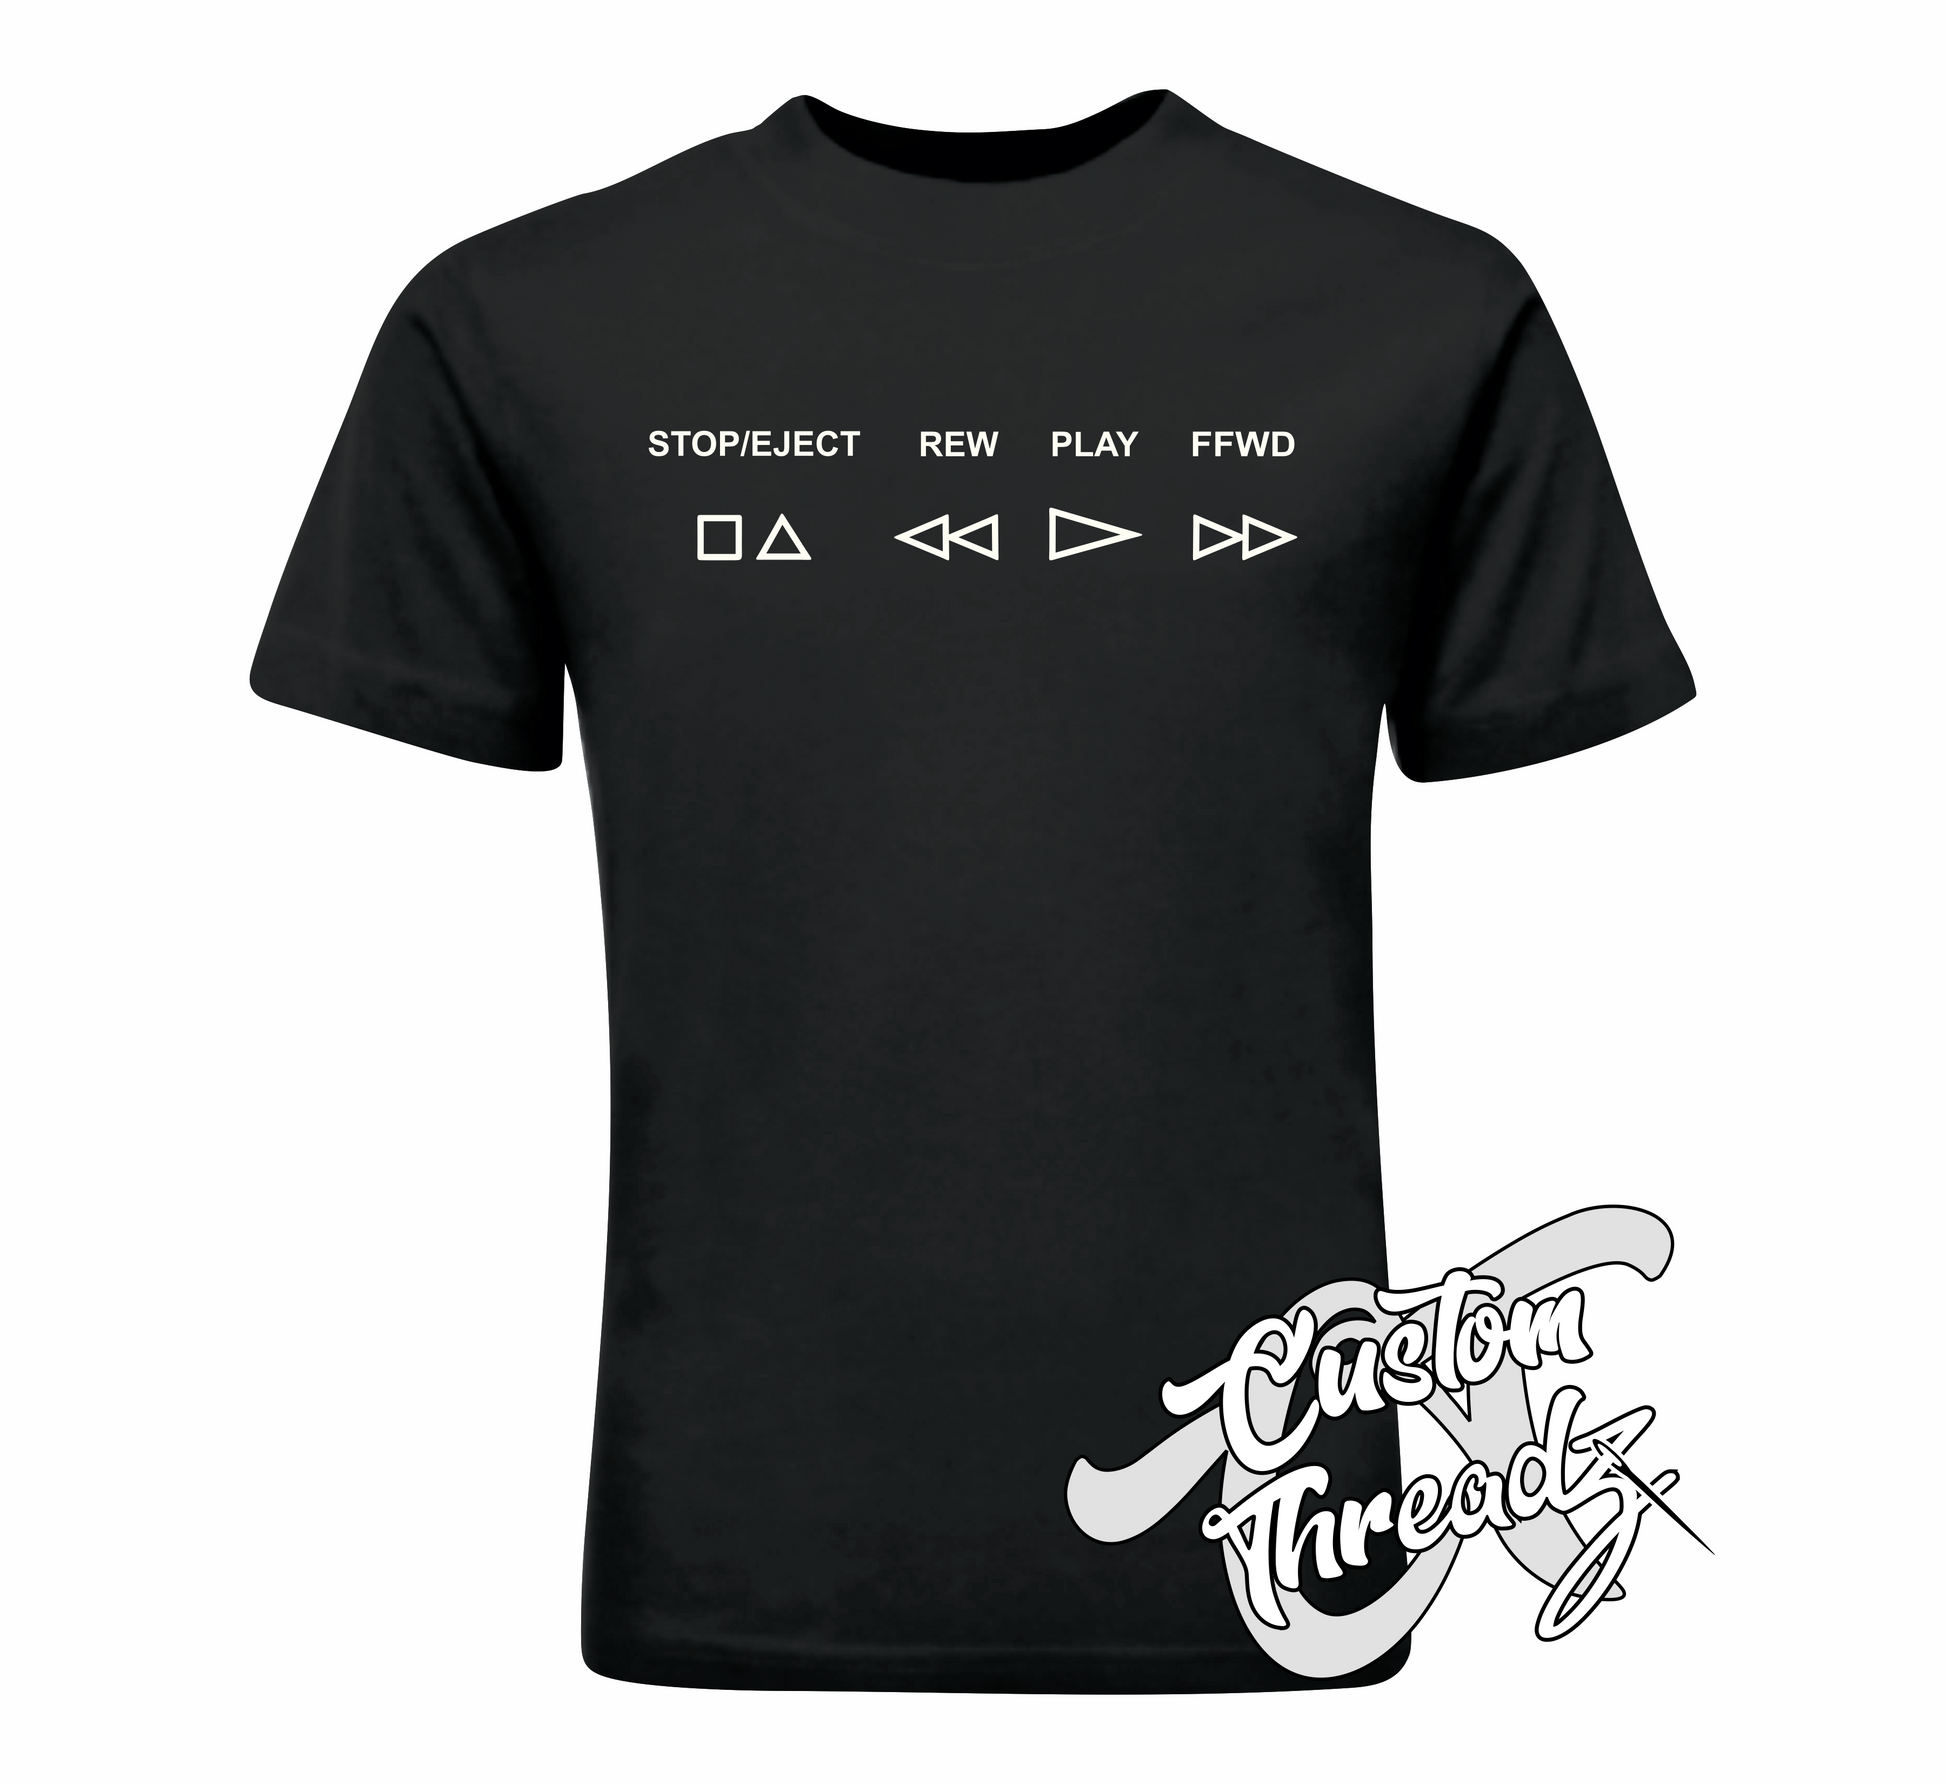 black tee with VCR buttons stop/eject rew play ffwd DTG printed design